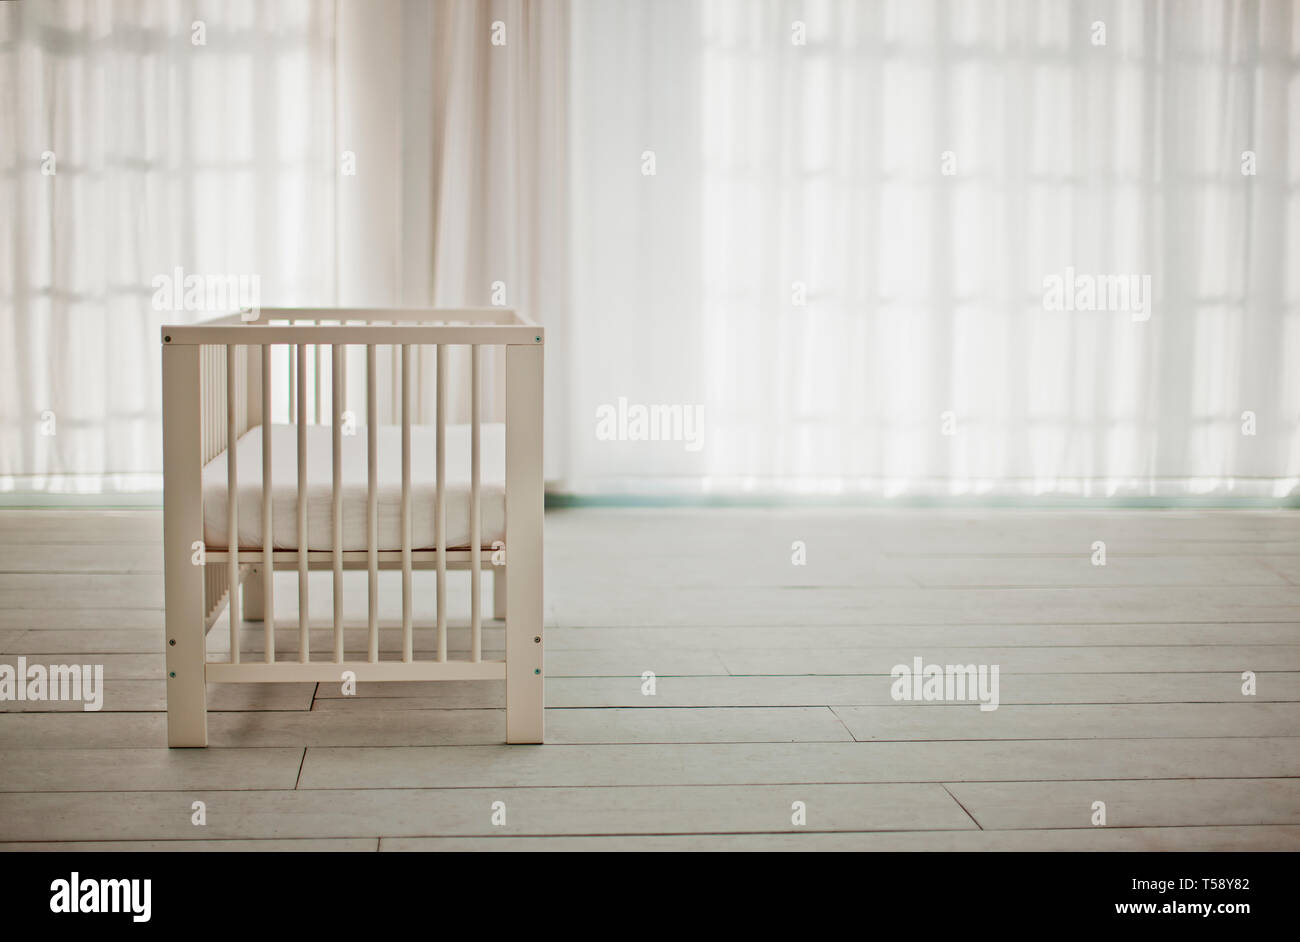 Empty white crib in a white room waiting for a baby. Stock Photo